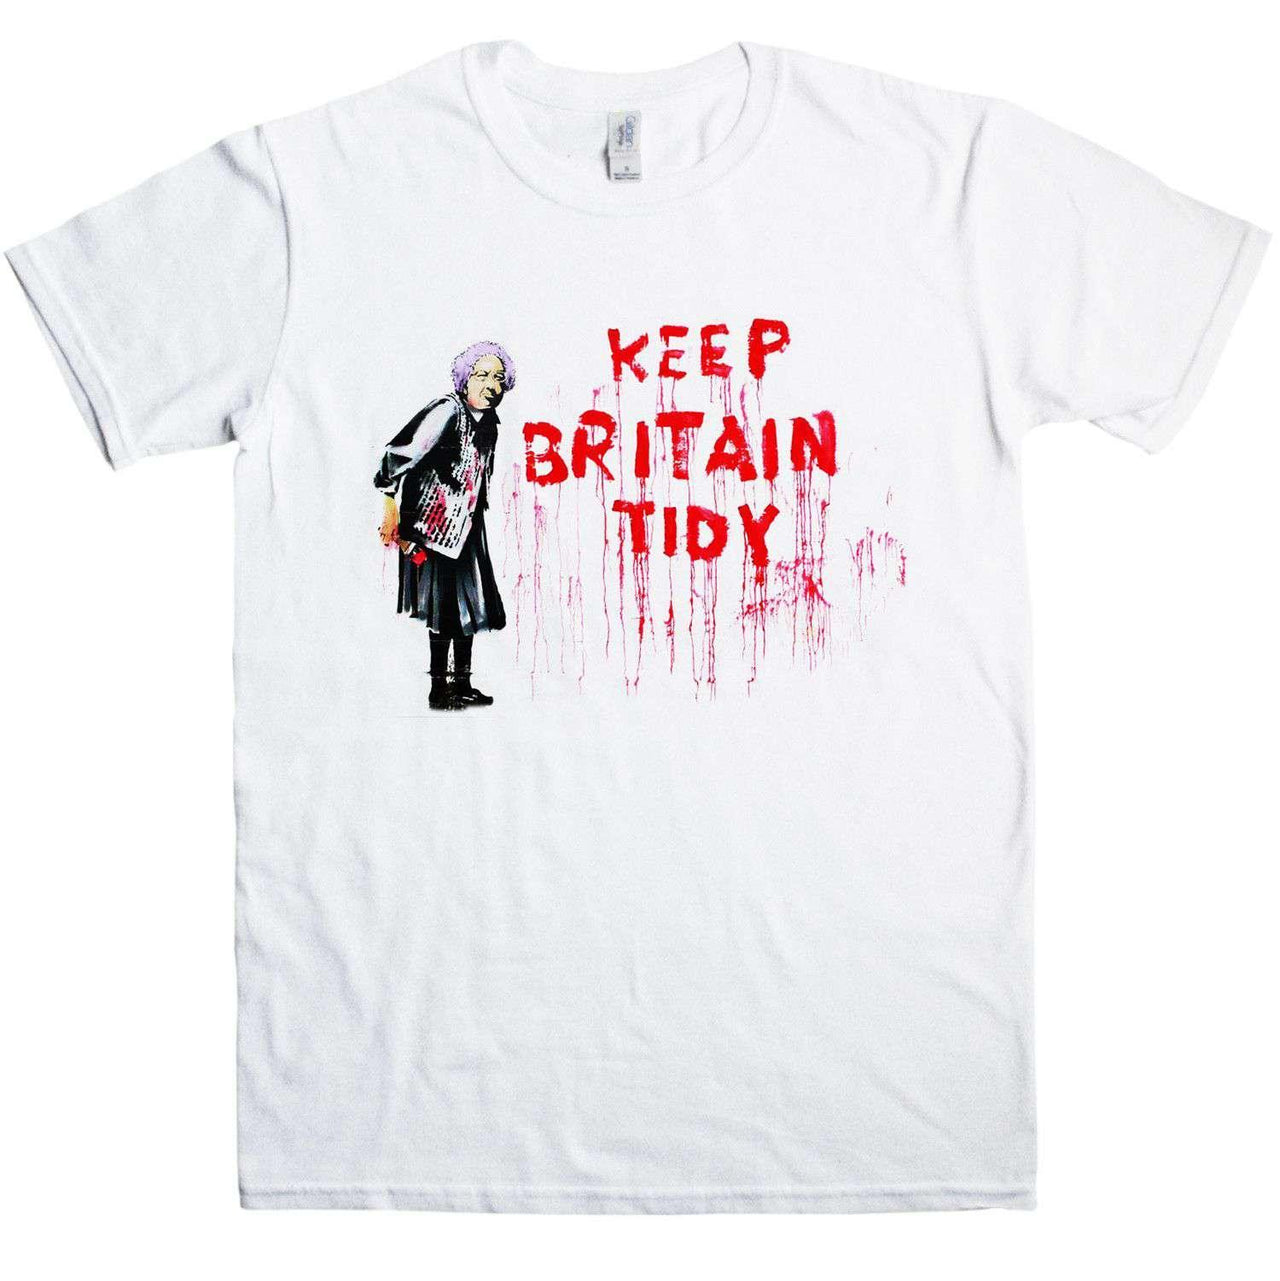 Banksy Keep Britain Tidy Graphic T-Shirt For Men 8Ball